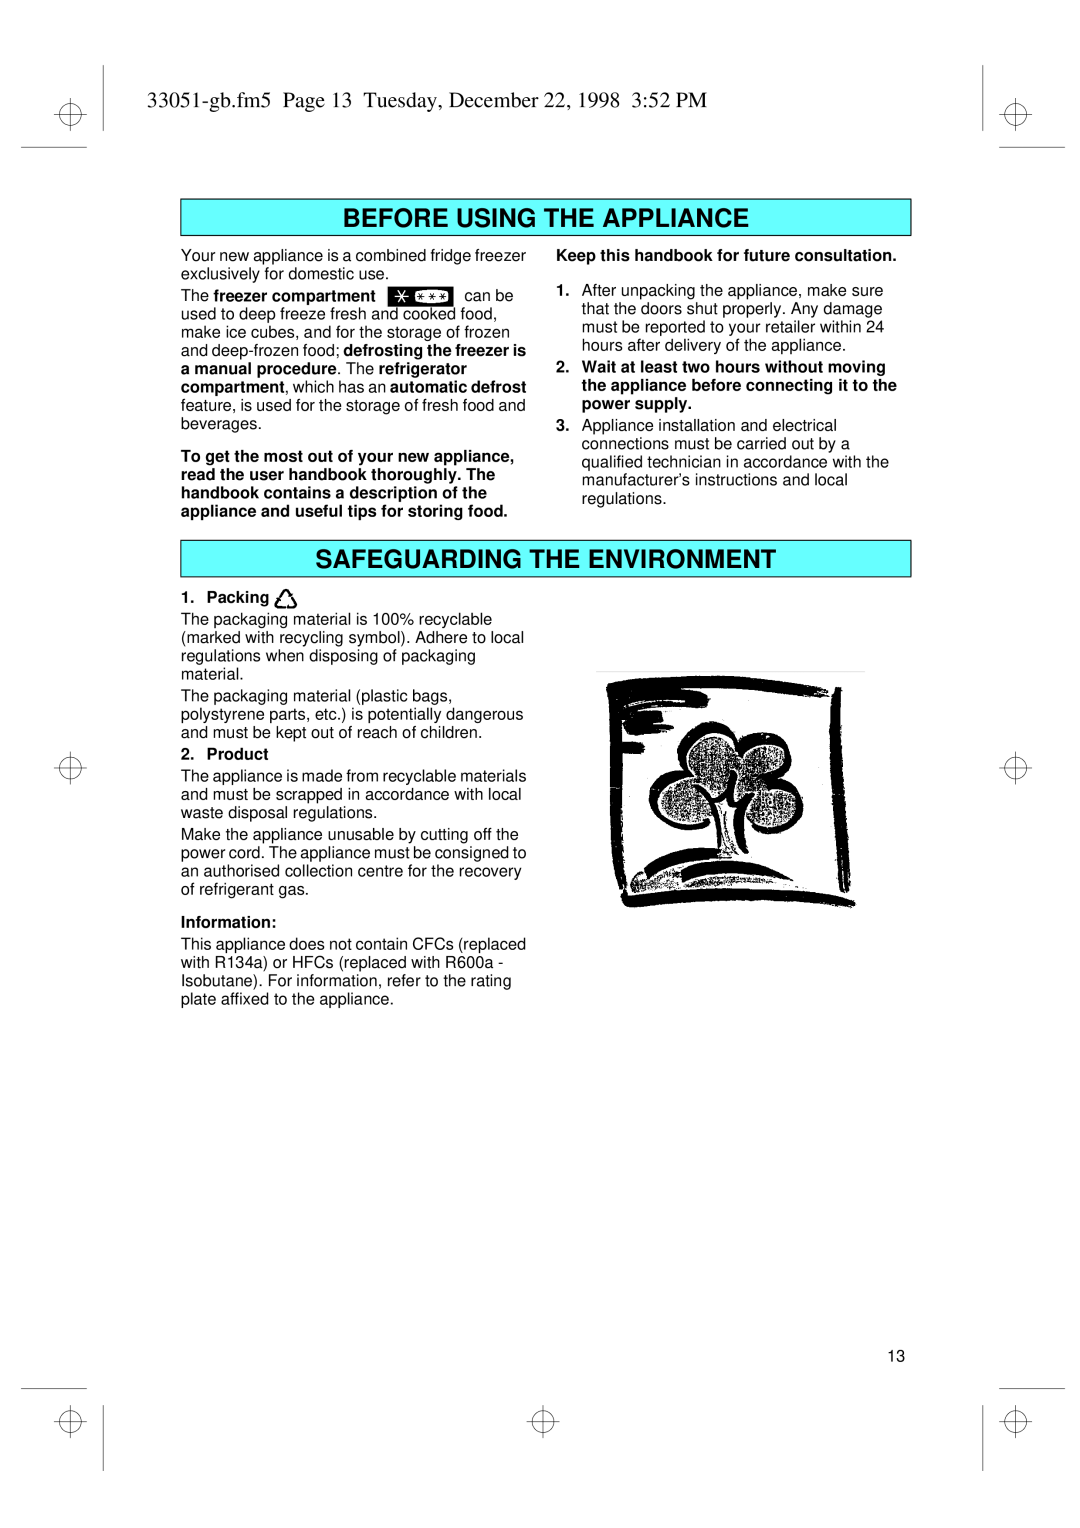 Smeg CR325A 33051-gb.fm5 Page 13 Tuesday, December 22, 1998 352 PM, Keep this handbook for future consultation, Packing 